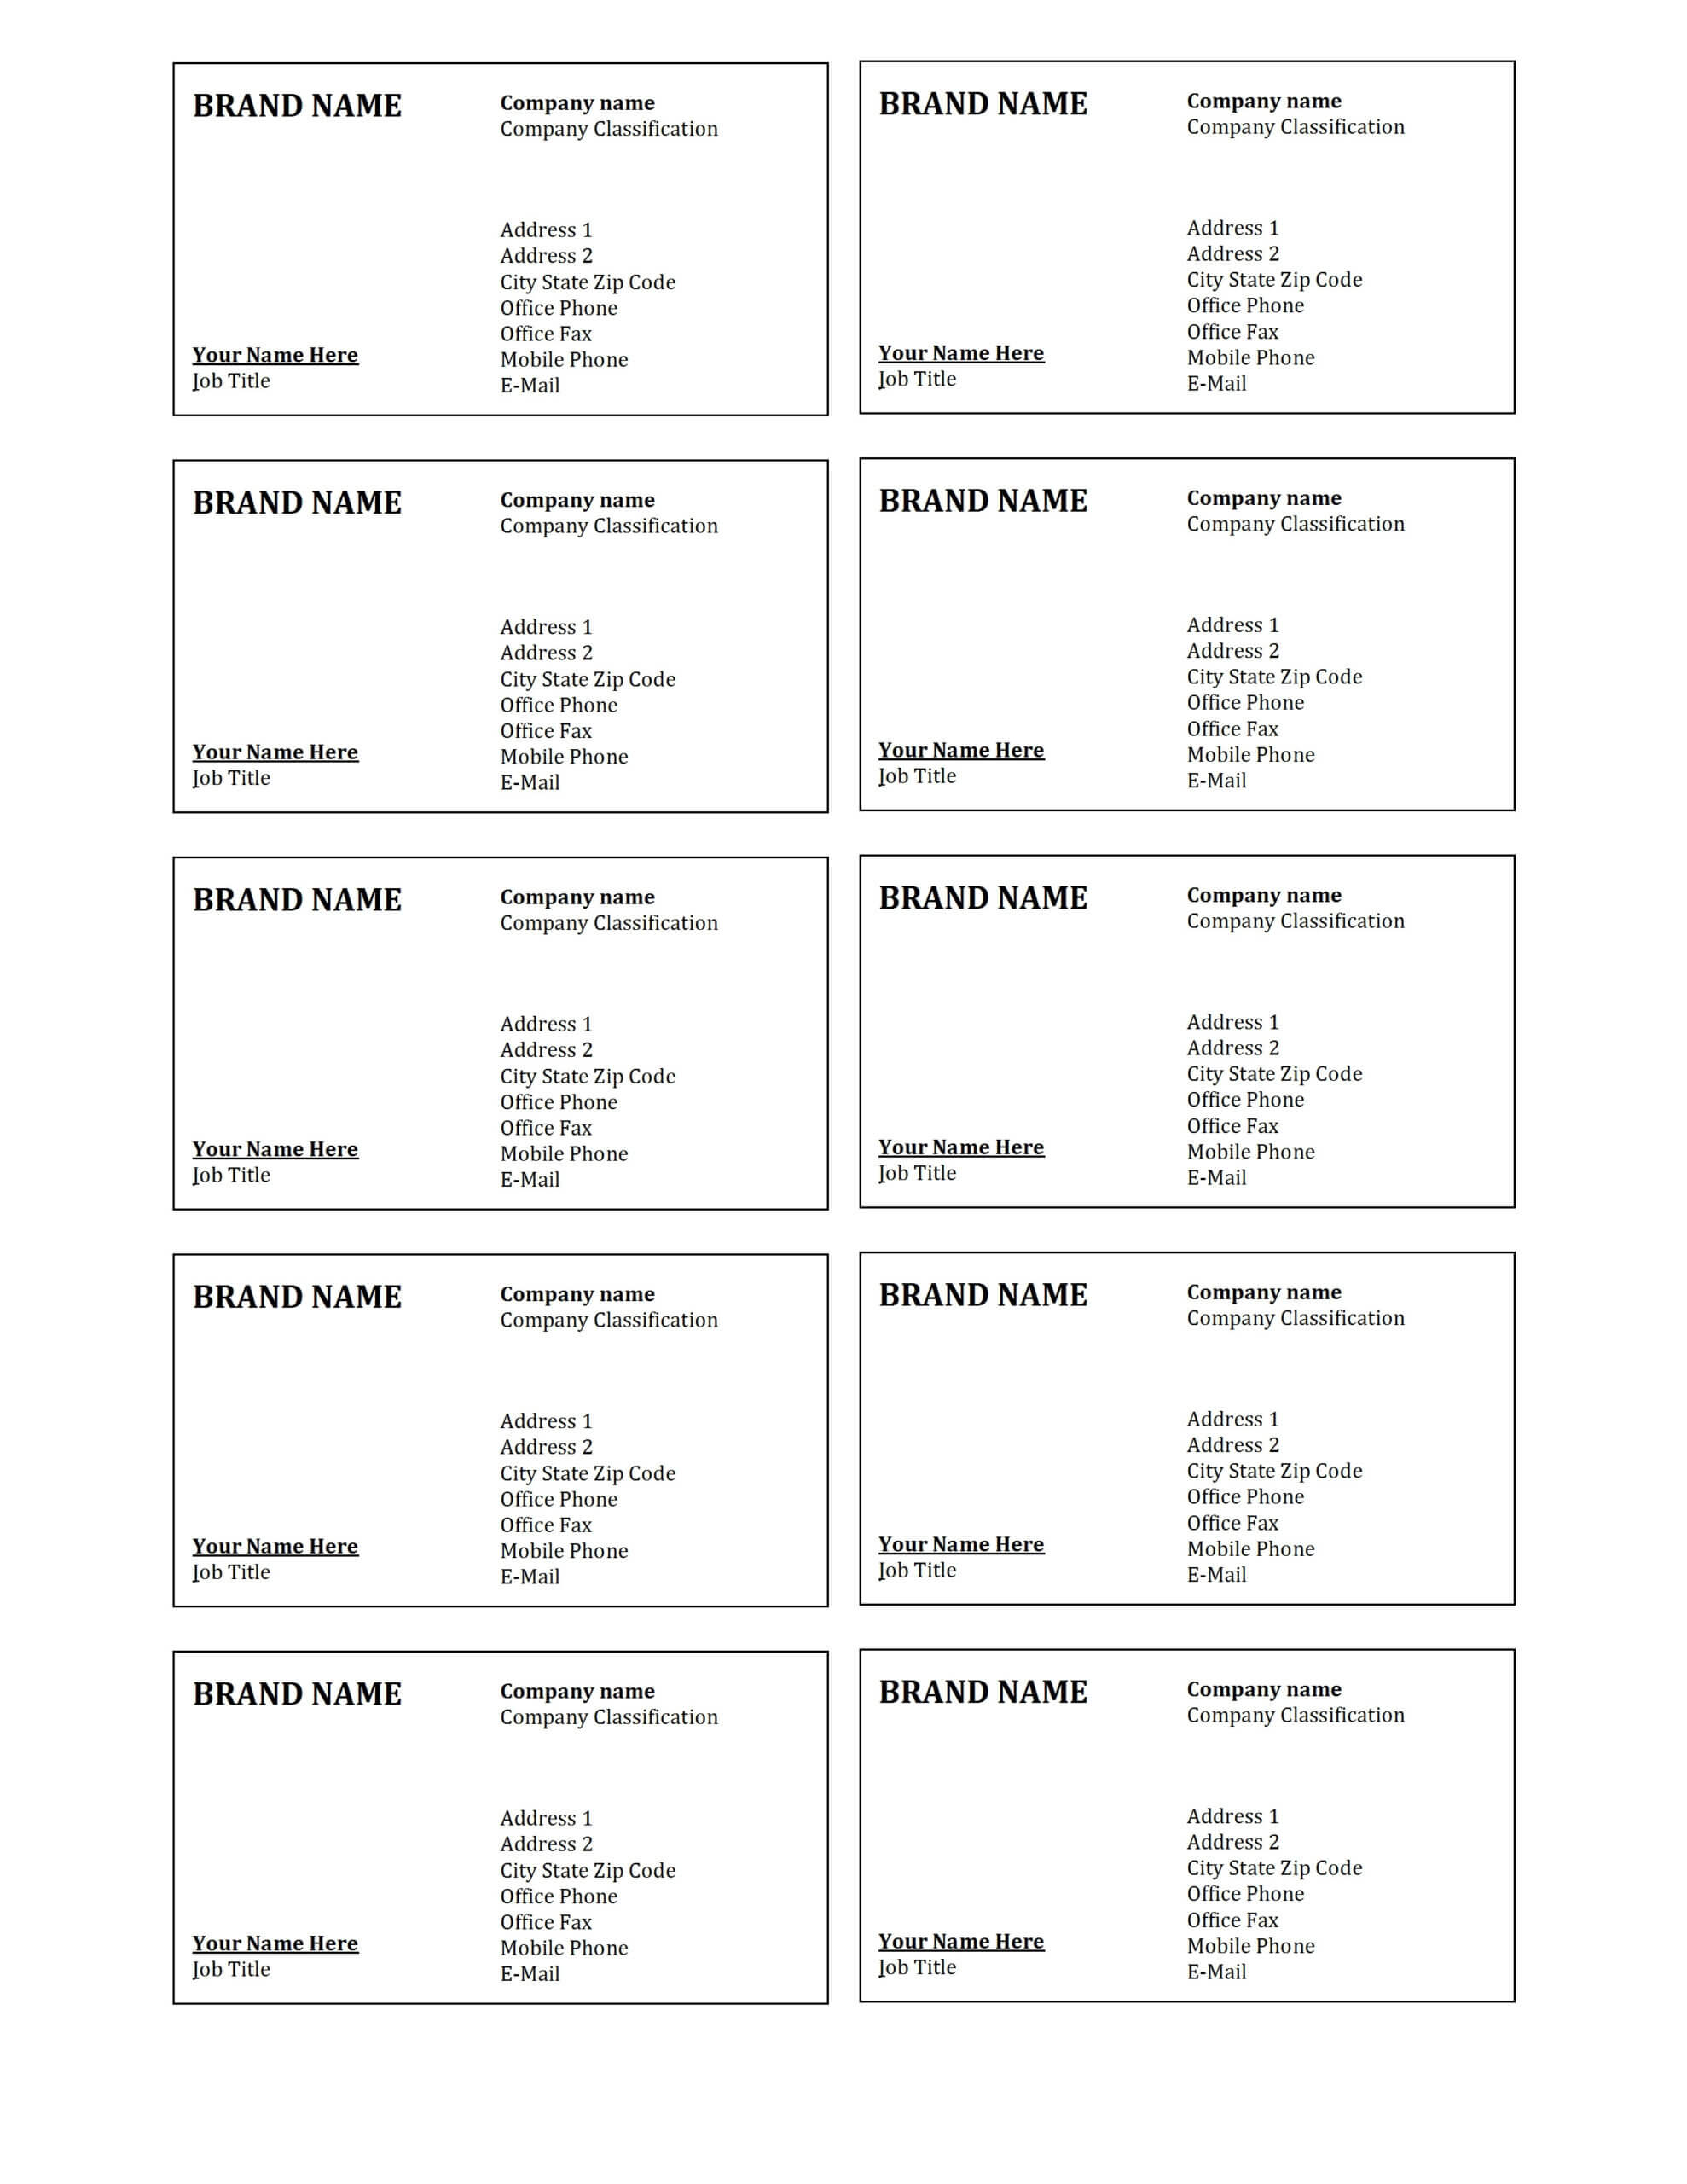 9 Visiting Card Sheet Templates | Fax Cover Sheet Examples Inside Plain Business Card Template Microsoft Word